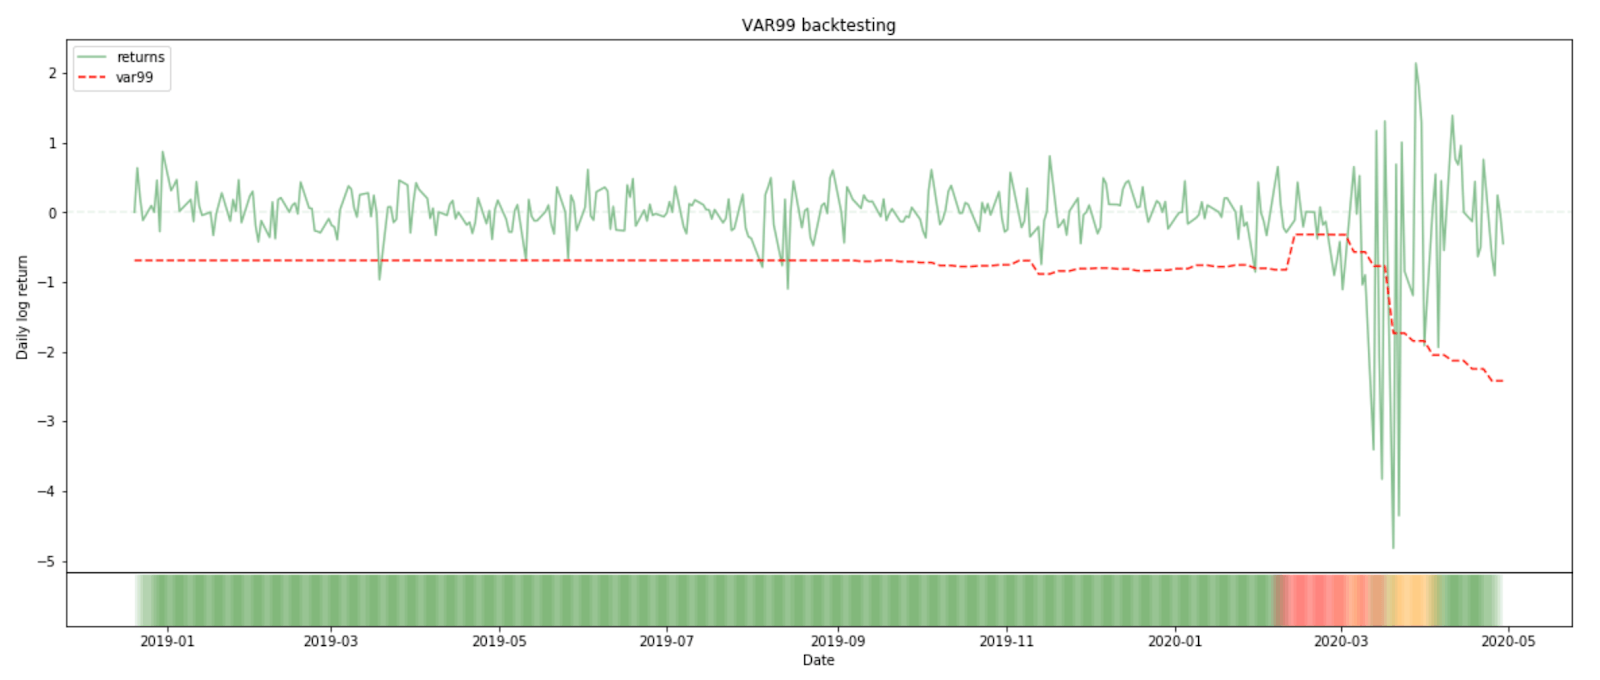 Sample backtest generated through the use of Spark SQL and Delta Lake to aggregate VaR over time.